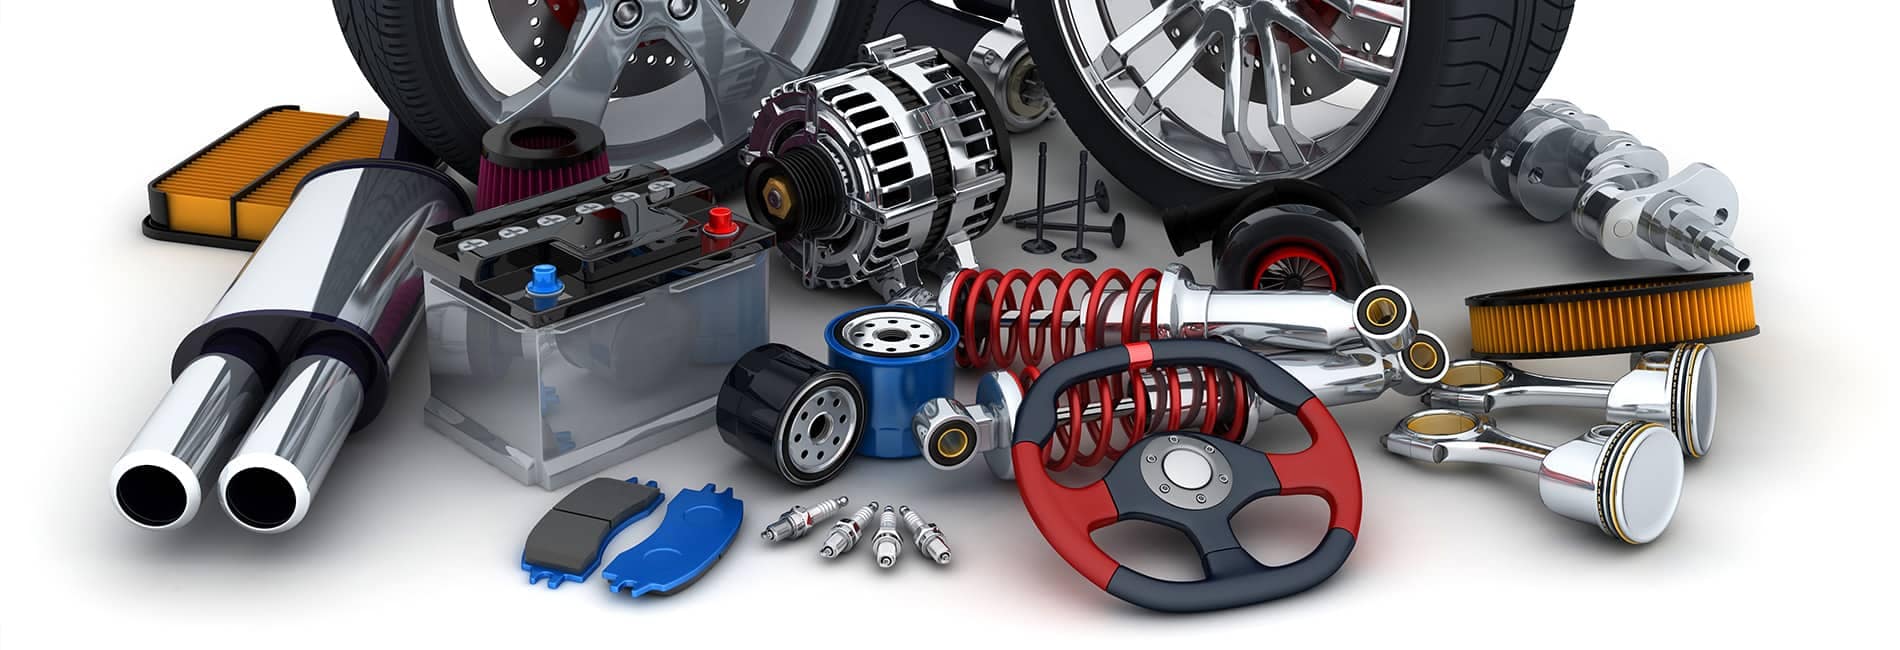 a large amount of car parts in an organized mess against a white background that are generic for legal reasons